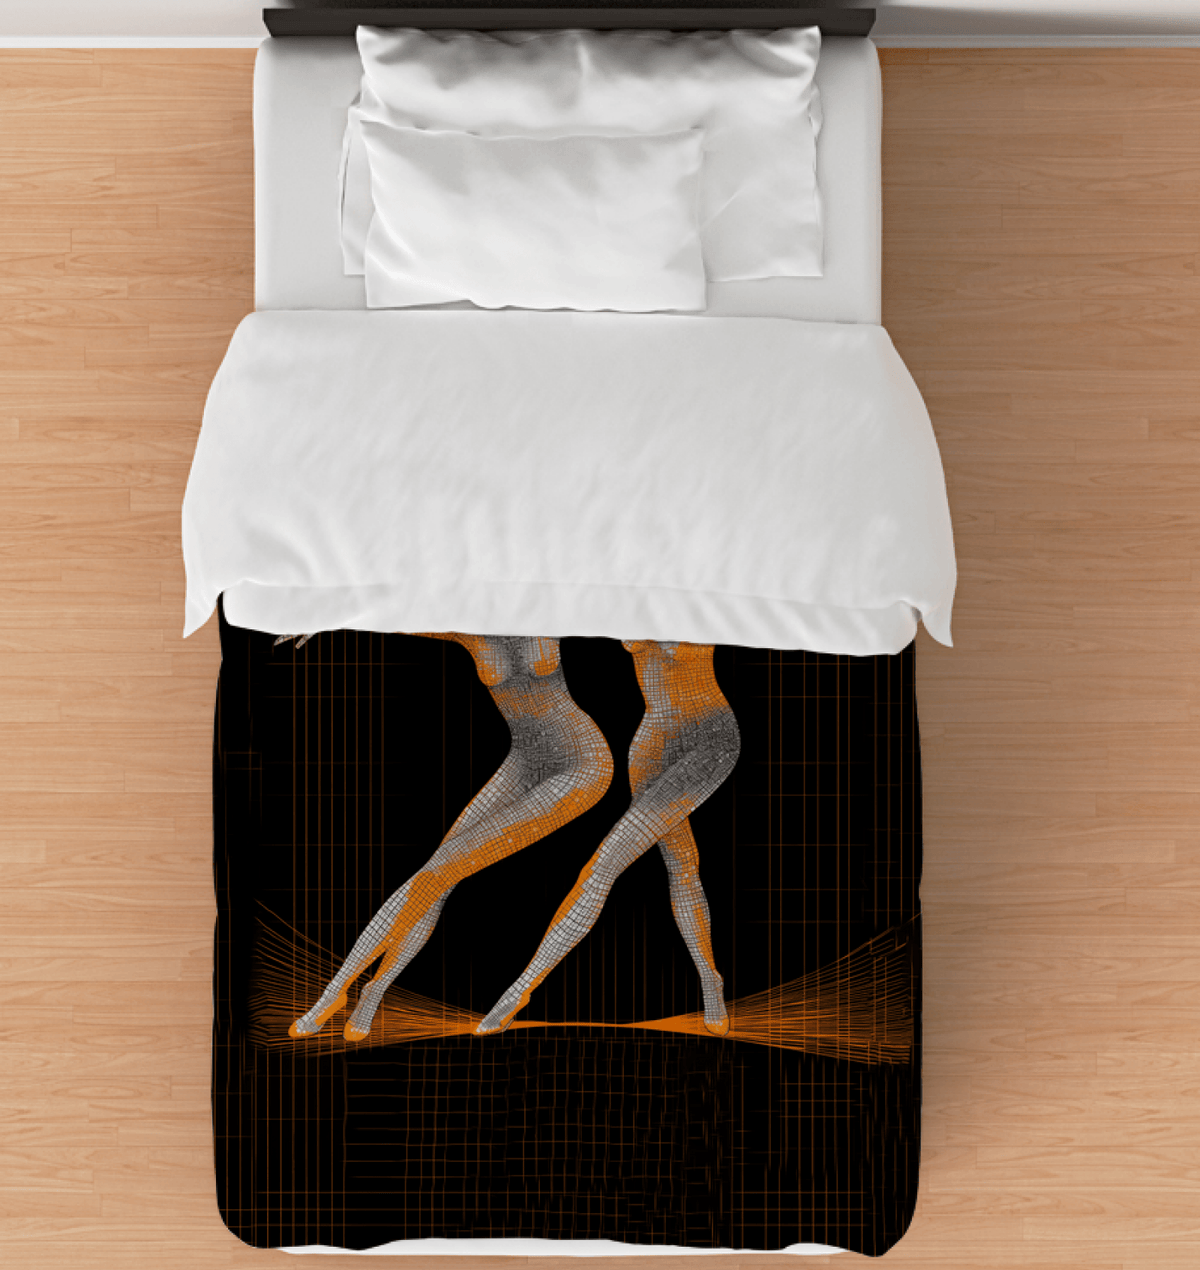 Cozy and stylish women's dance attire-themed twin comforter, ideal for bringing comfort and sophistication to any sleeping space.